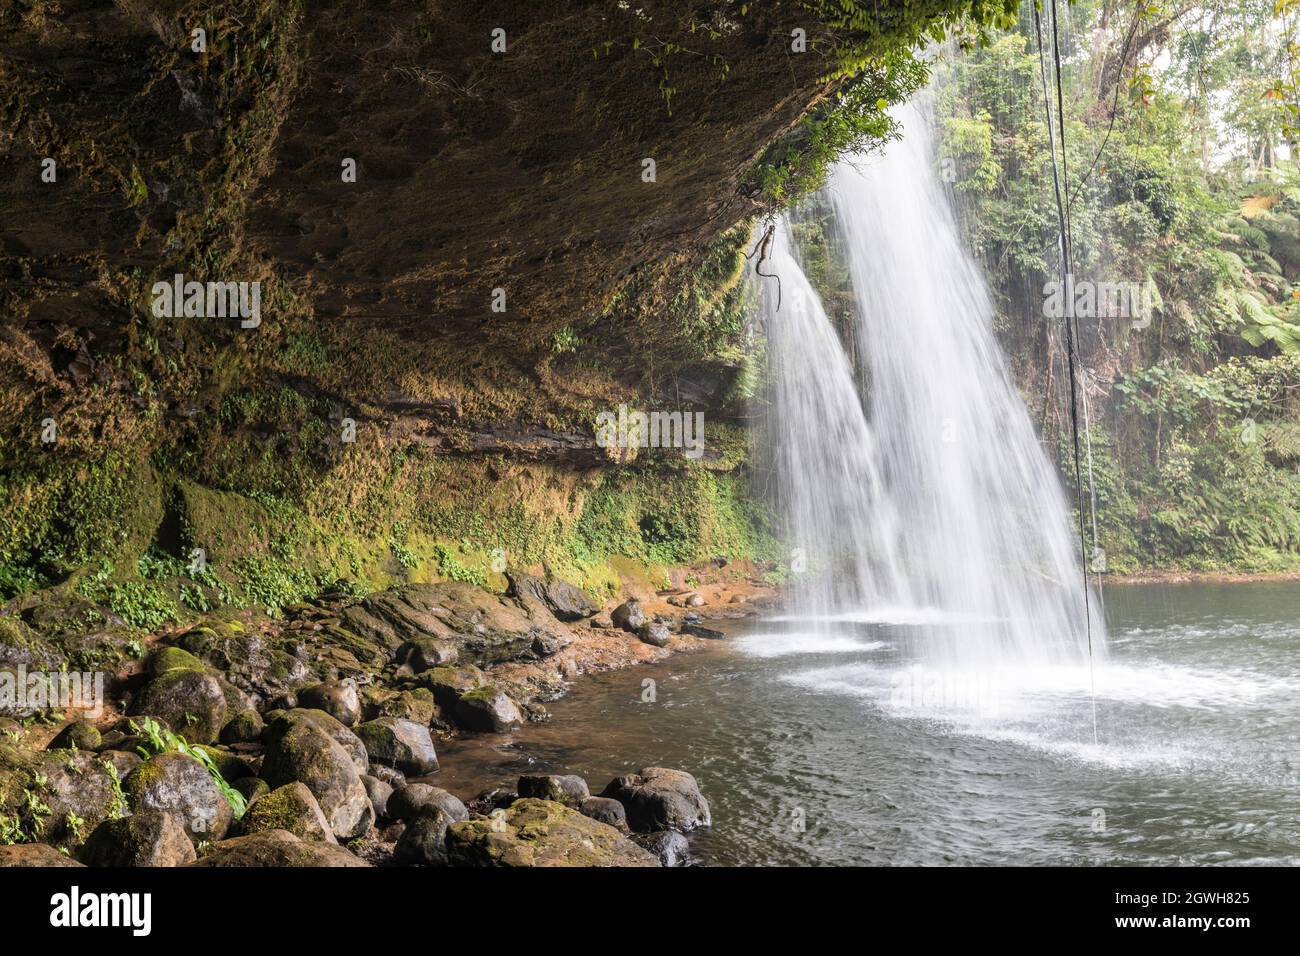 Waterfall in nature park, Tham Champy, Paksong, Laos Stock Photo